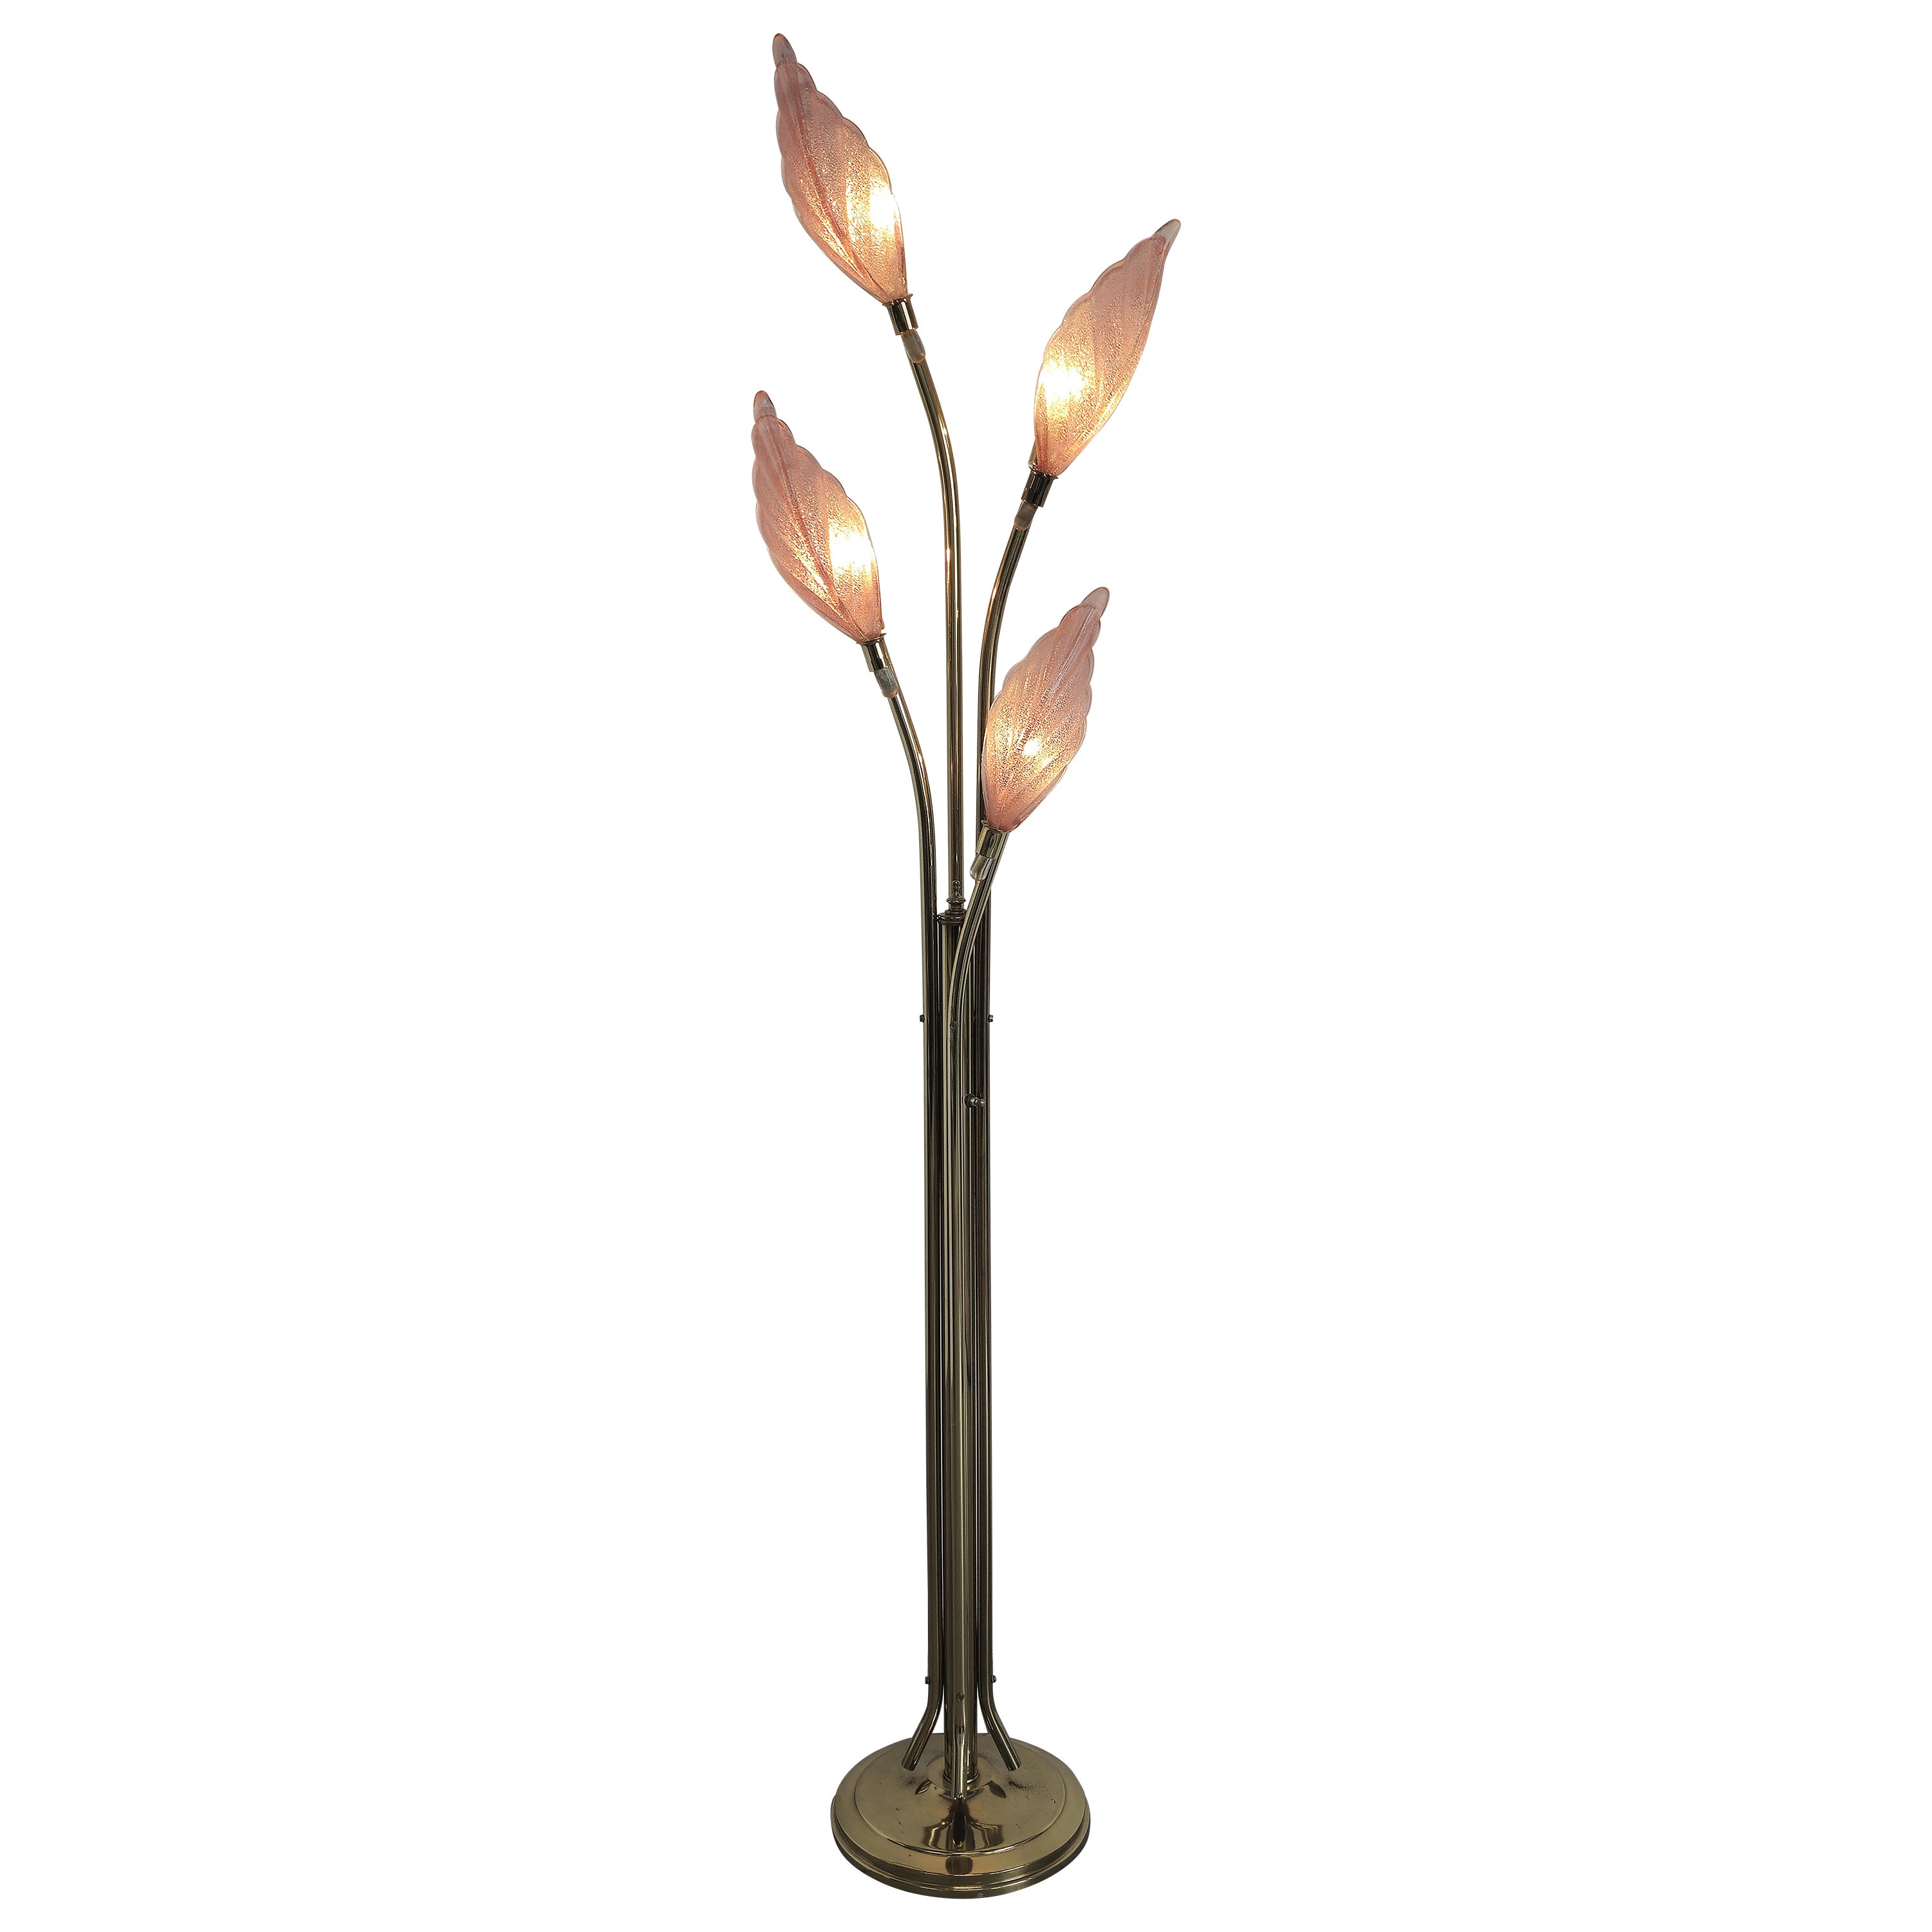 Art Glass And Brass 1970s Floral Flower Floor Lamp